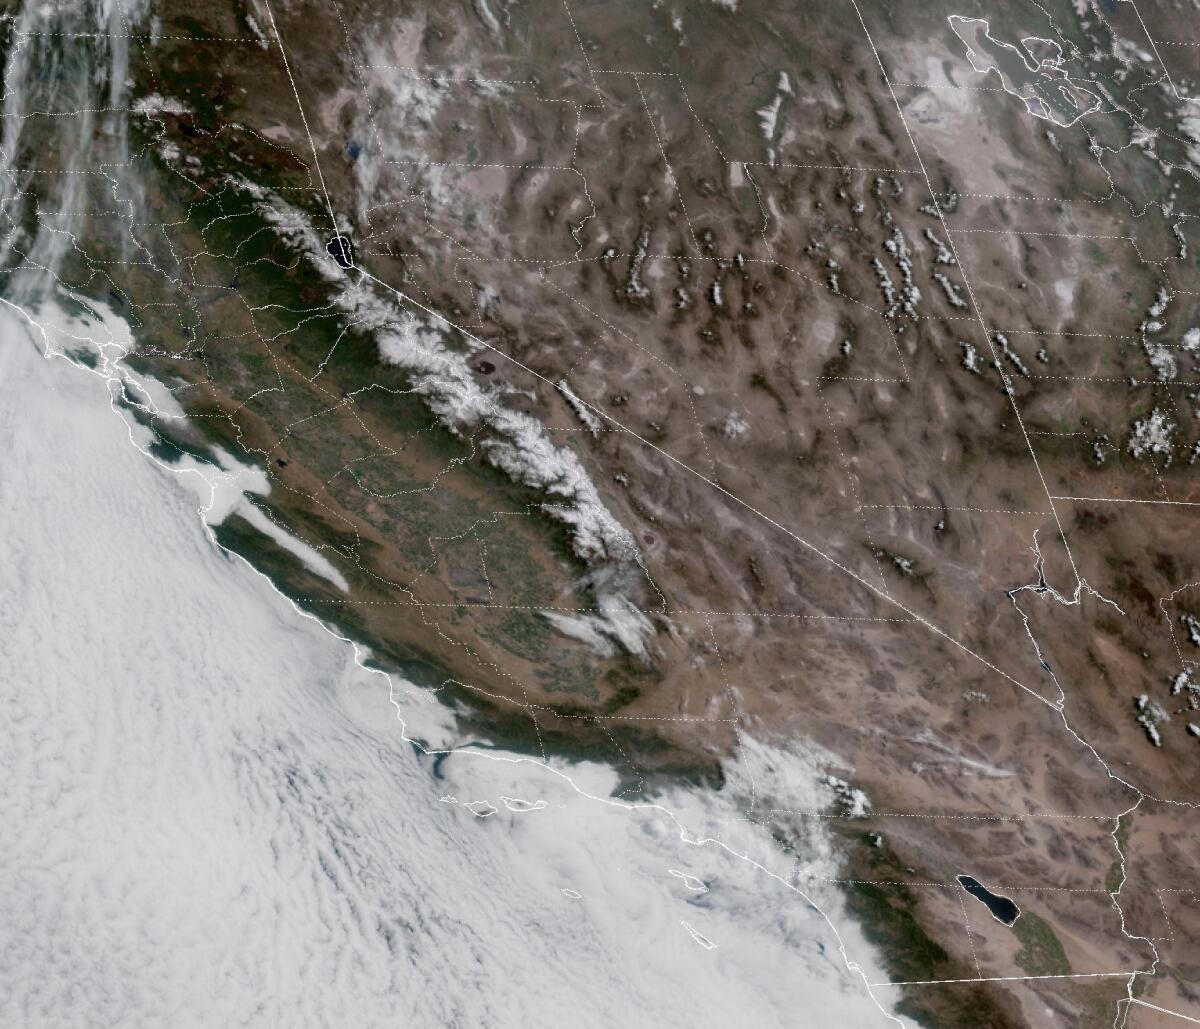 Winds will cycle ashore from the northwest this week, thickening the "May gray" marine layer.